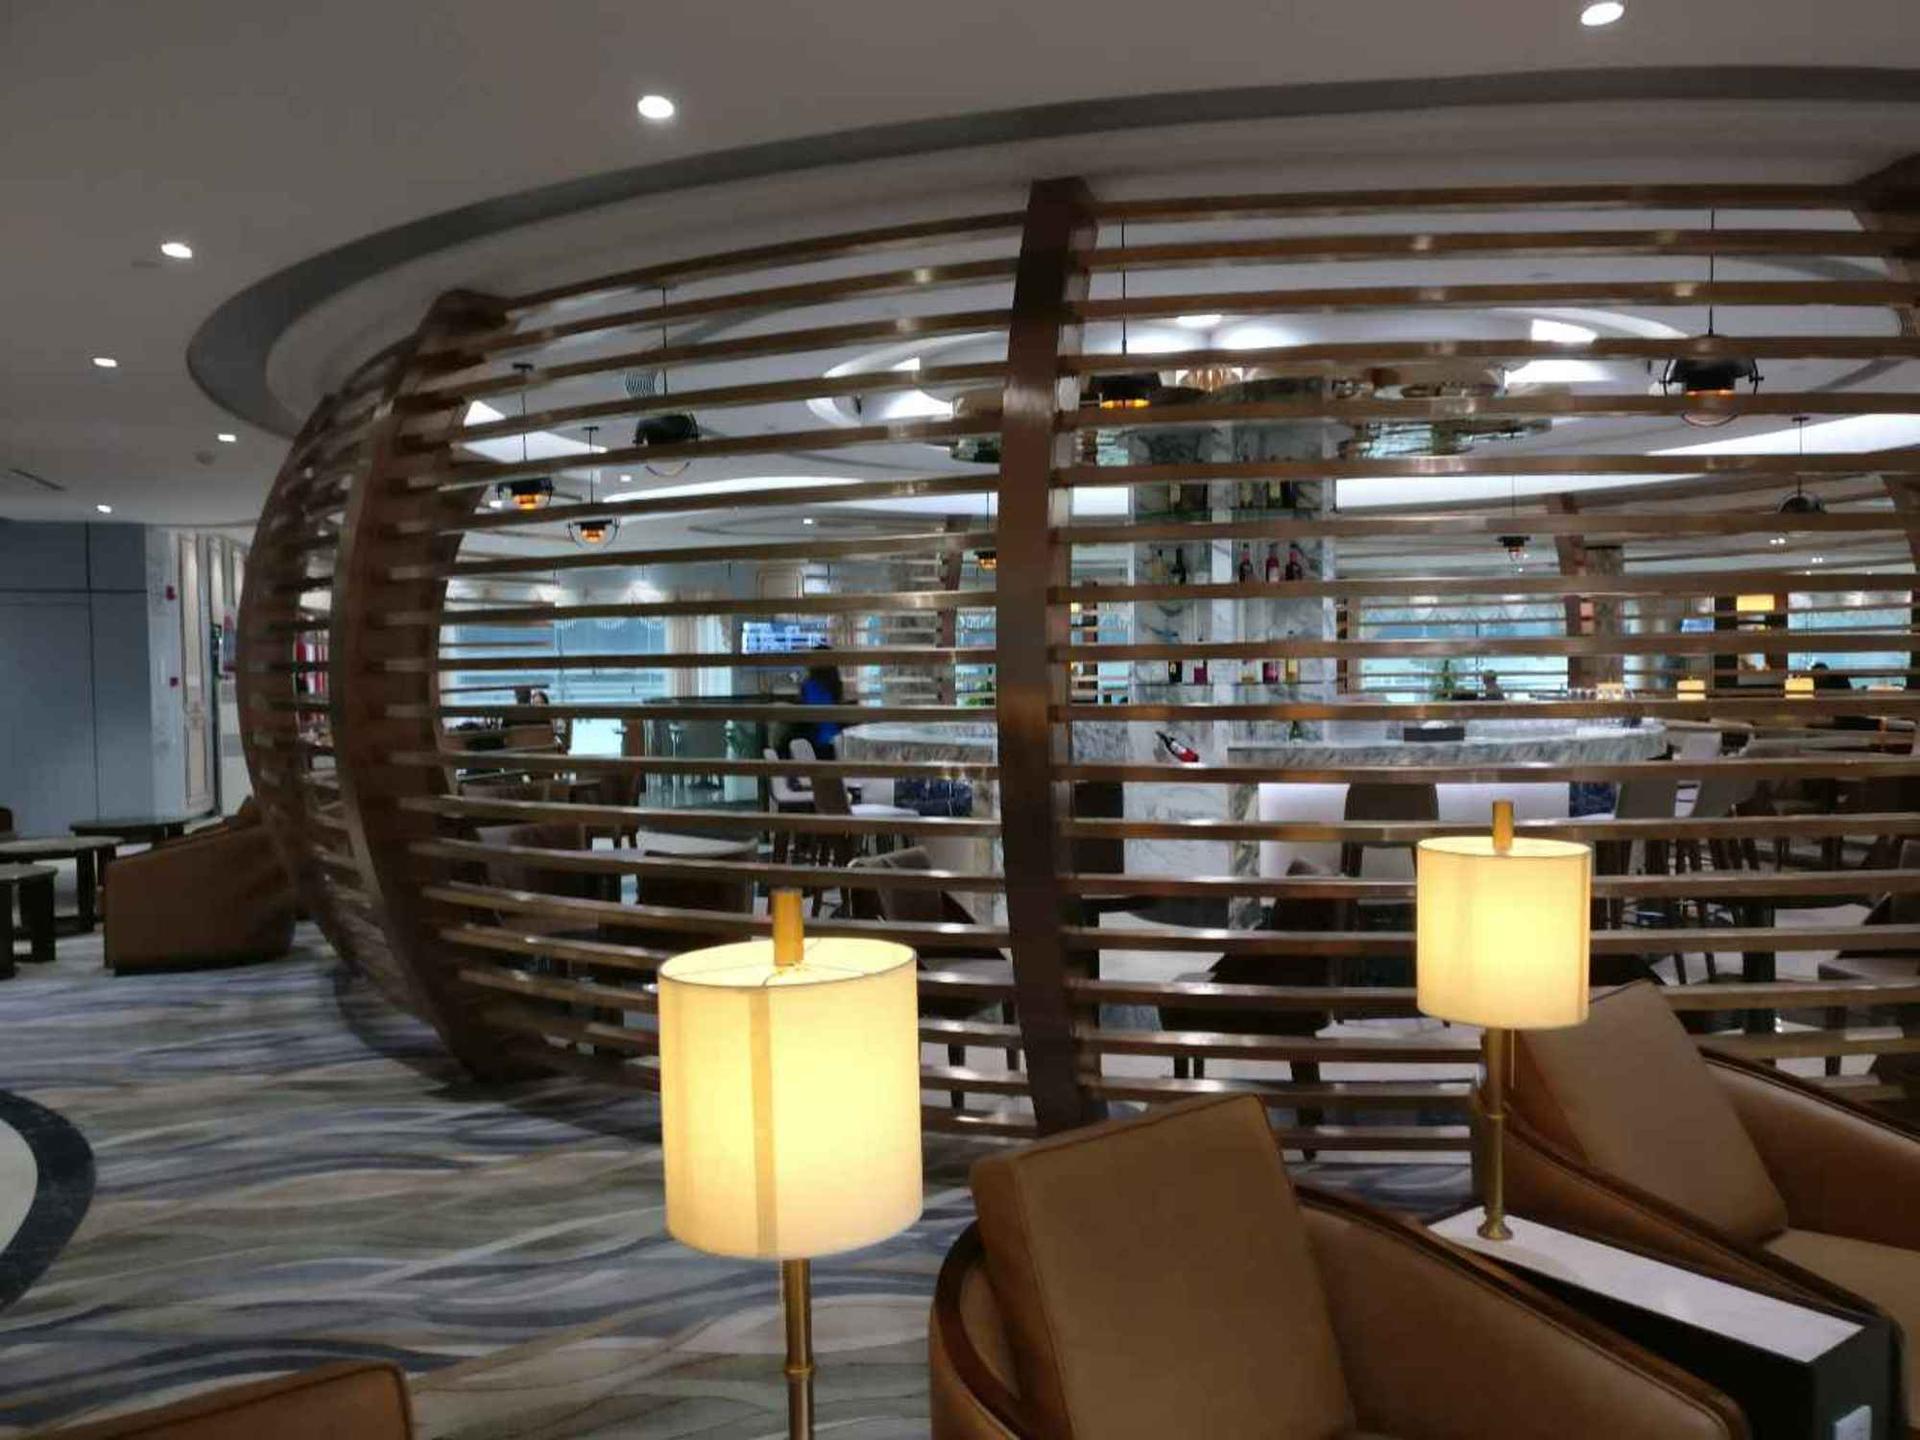 No. 1 First and Business Class Lounge image 4 of 7